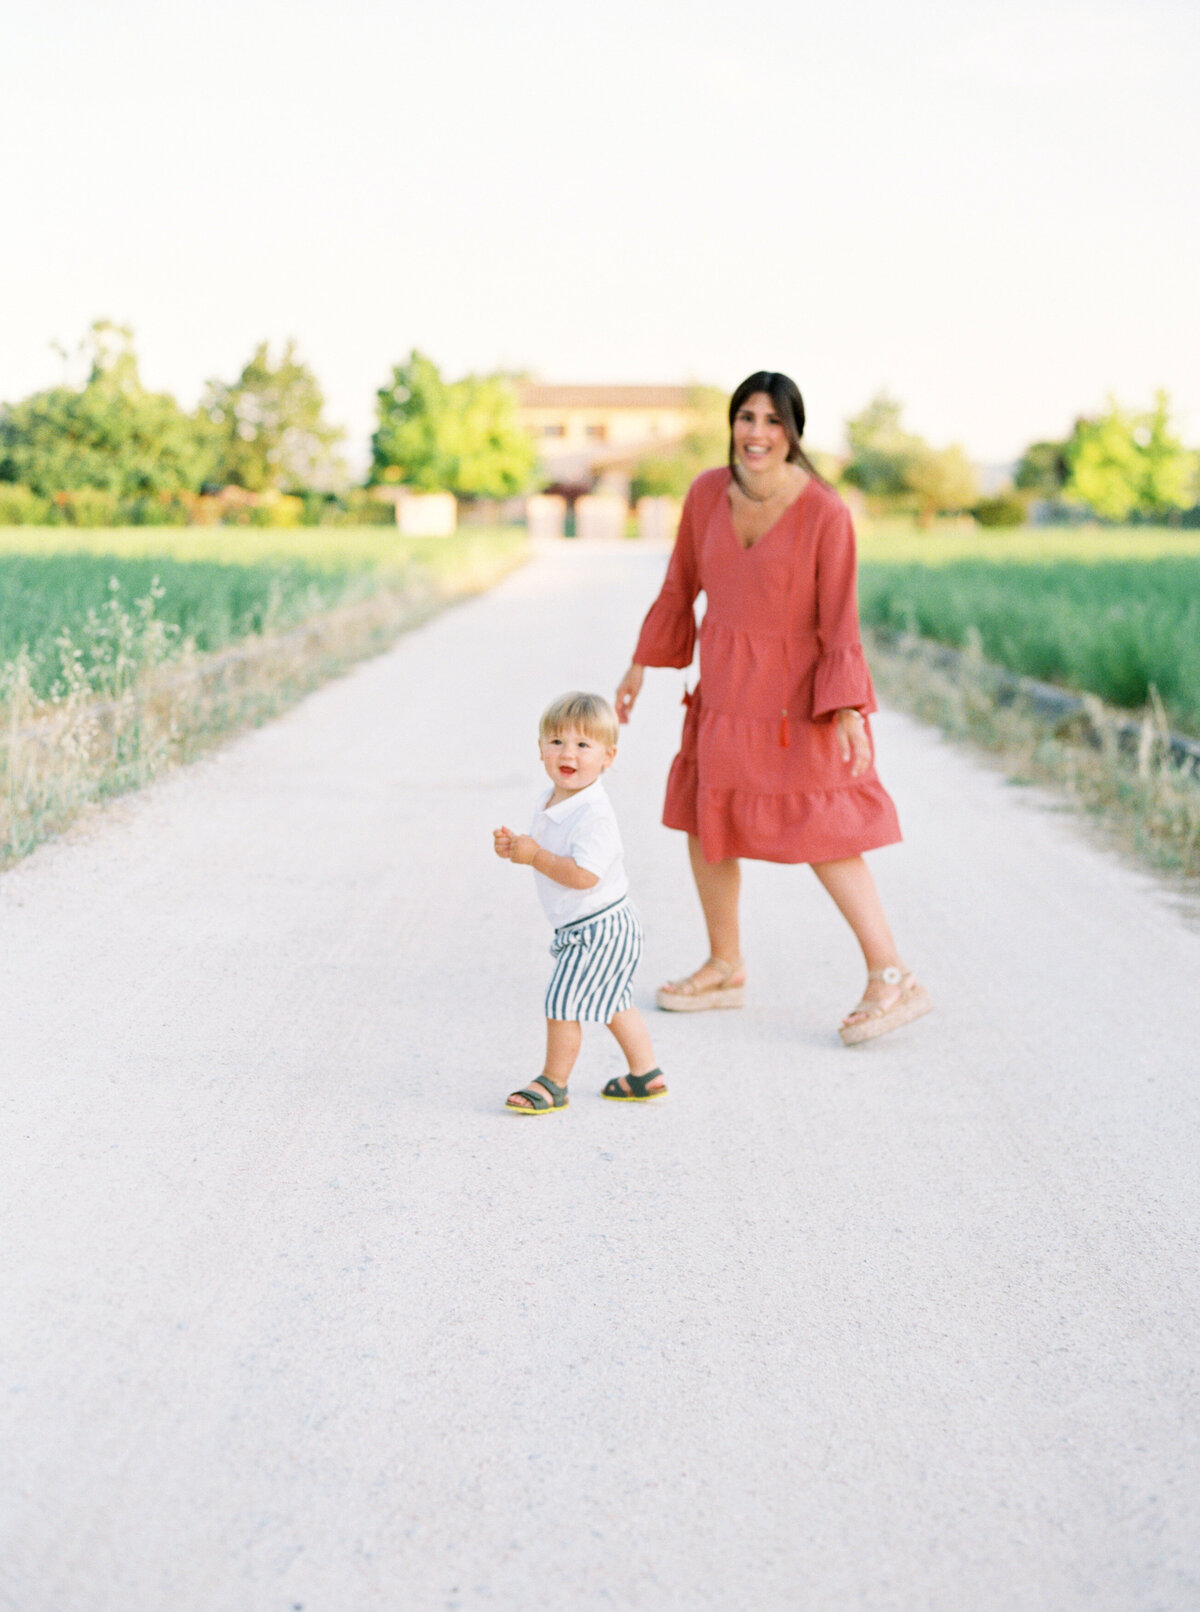 Family photography session outdoors in Cesena, Emilia-Romagna, Italy - 11